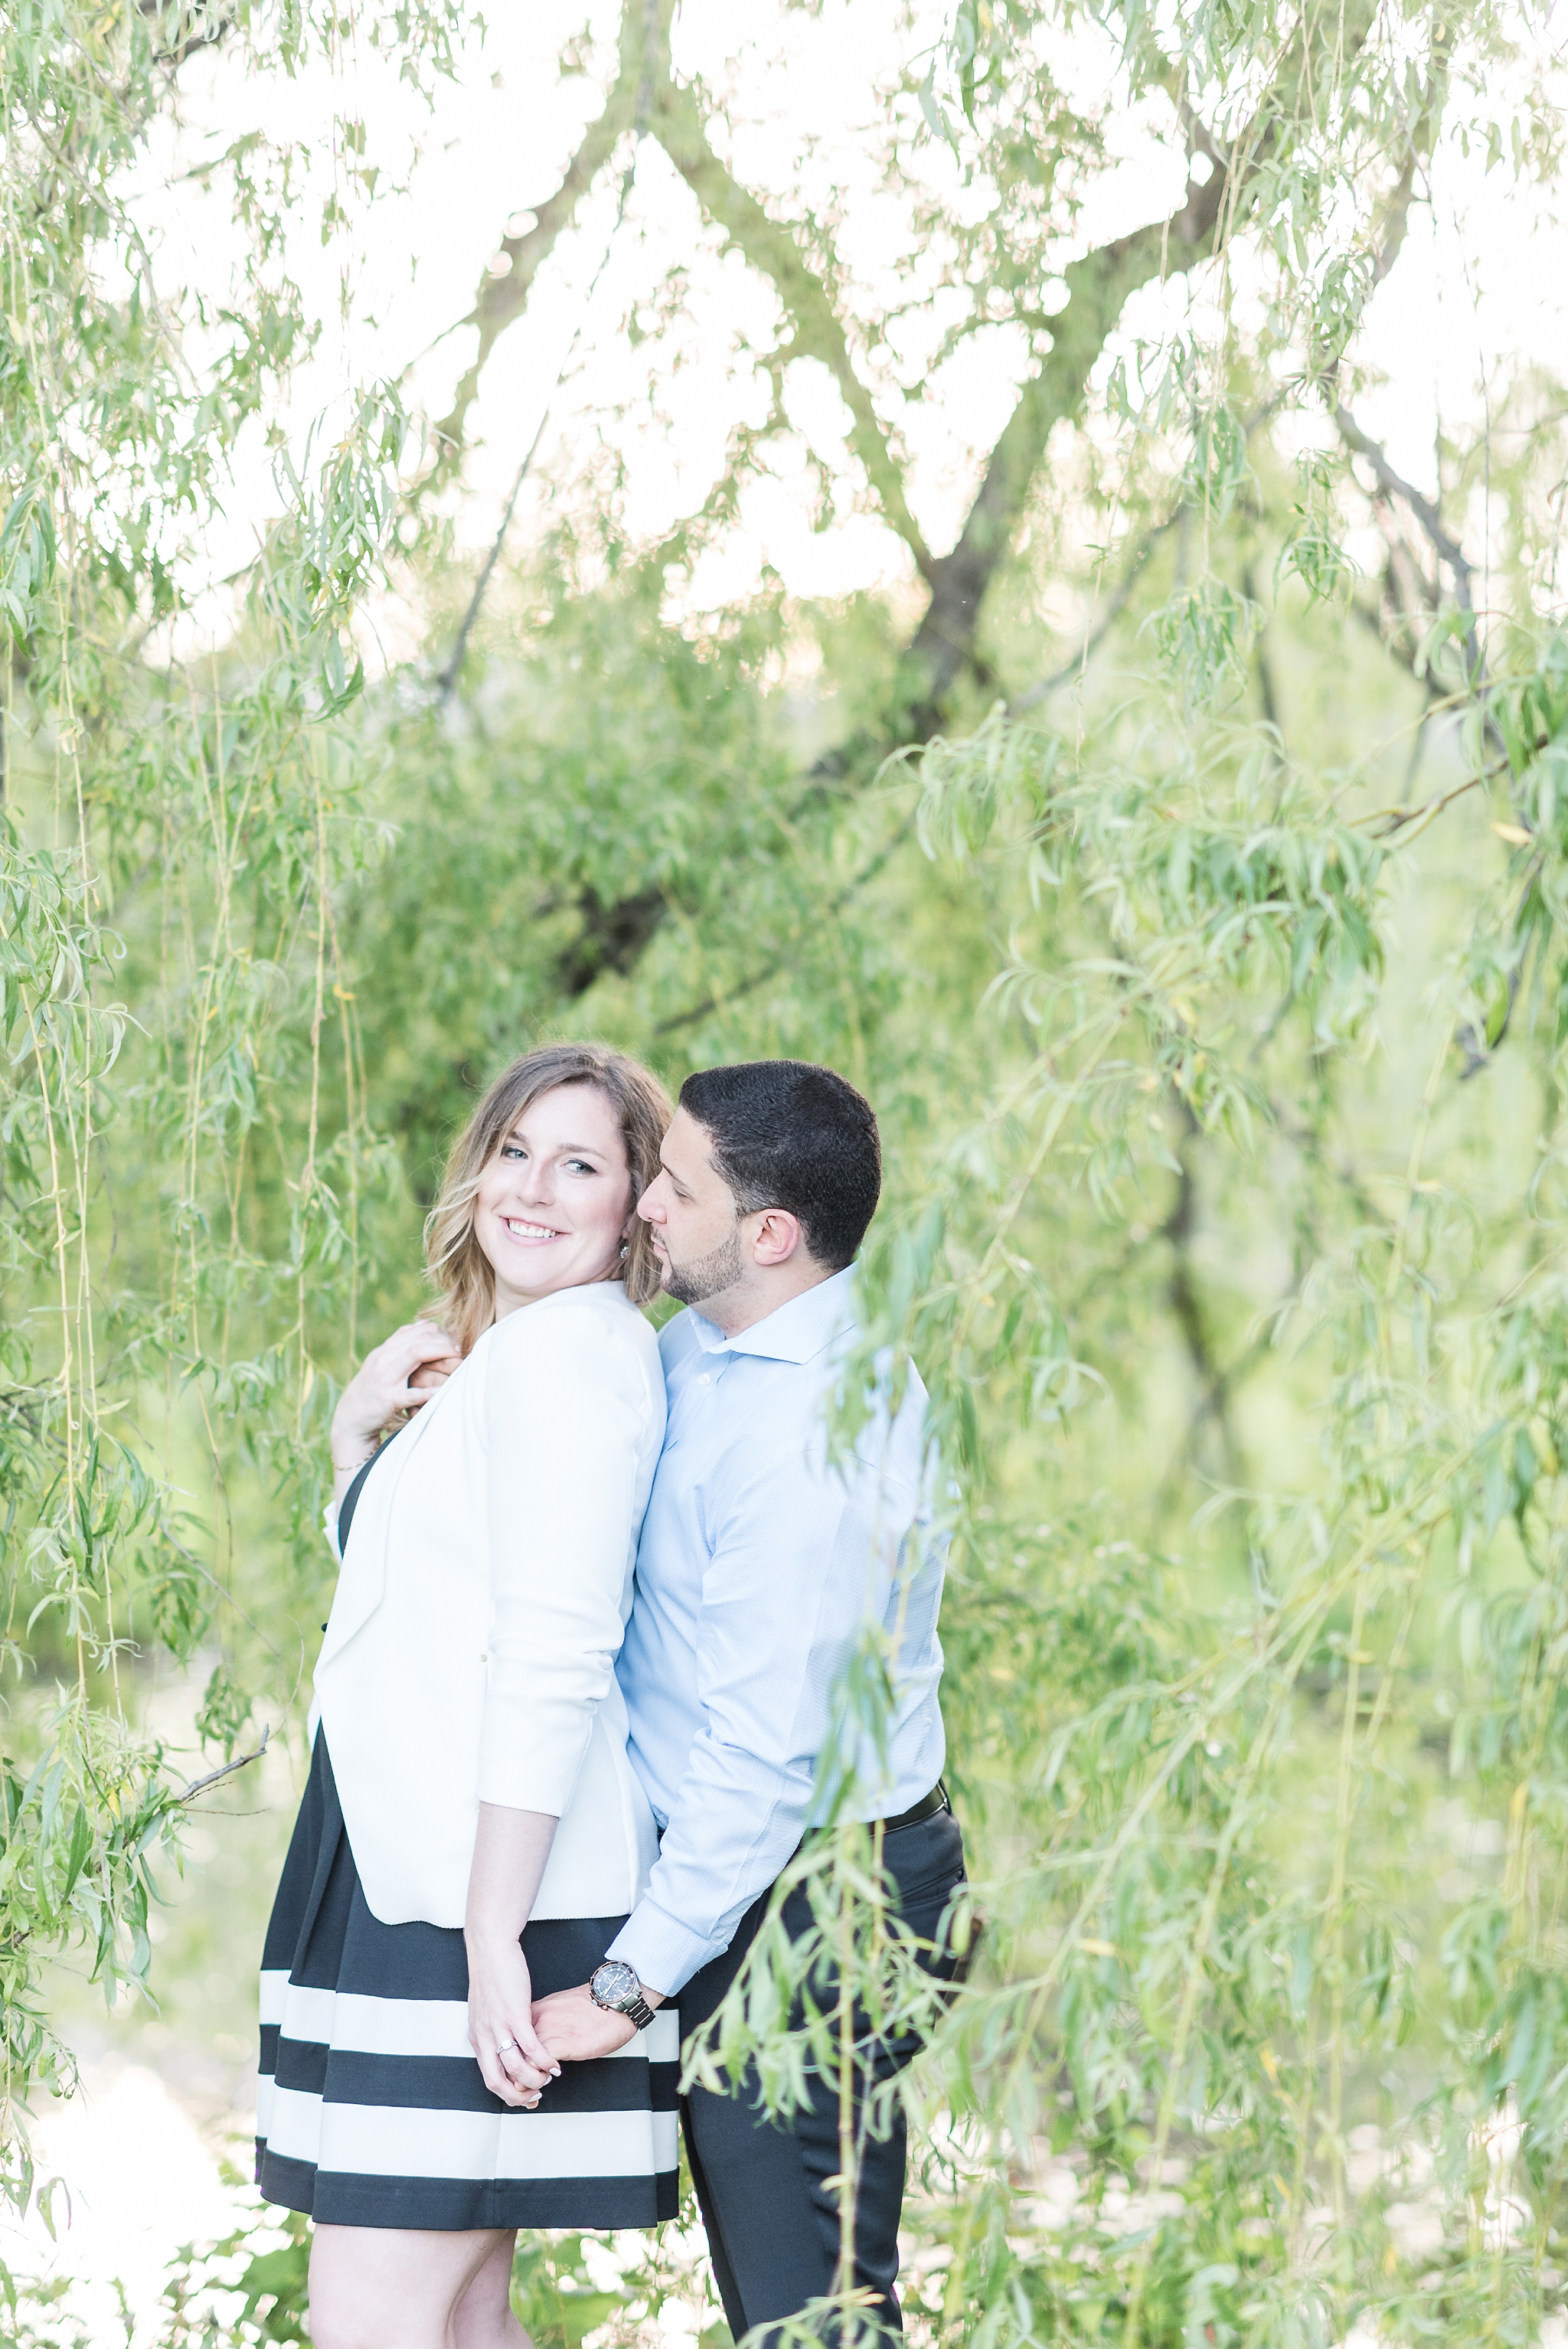 Spring experimental farm engagement | ottawa engagement | engagement photos at dominion arboretum at the central experimental farm get more inspiration from this fun springtime engagement session. #ottawawedding #weddingphotography #ottawaweddings